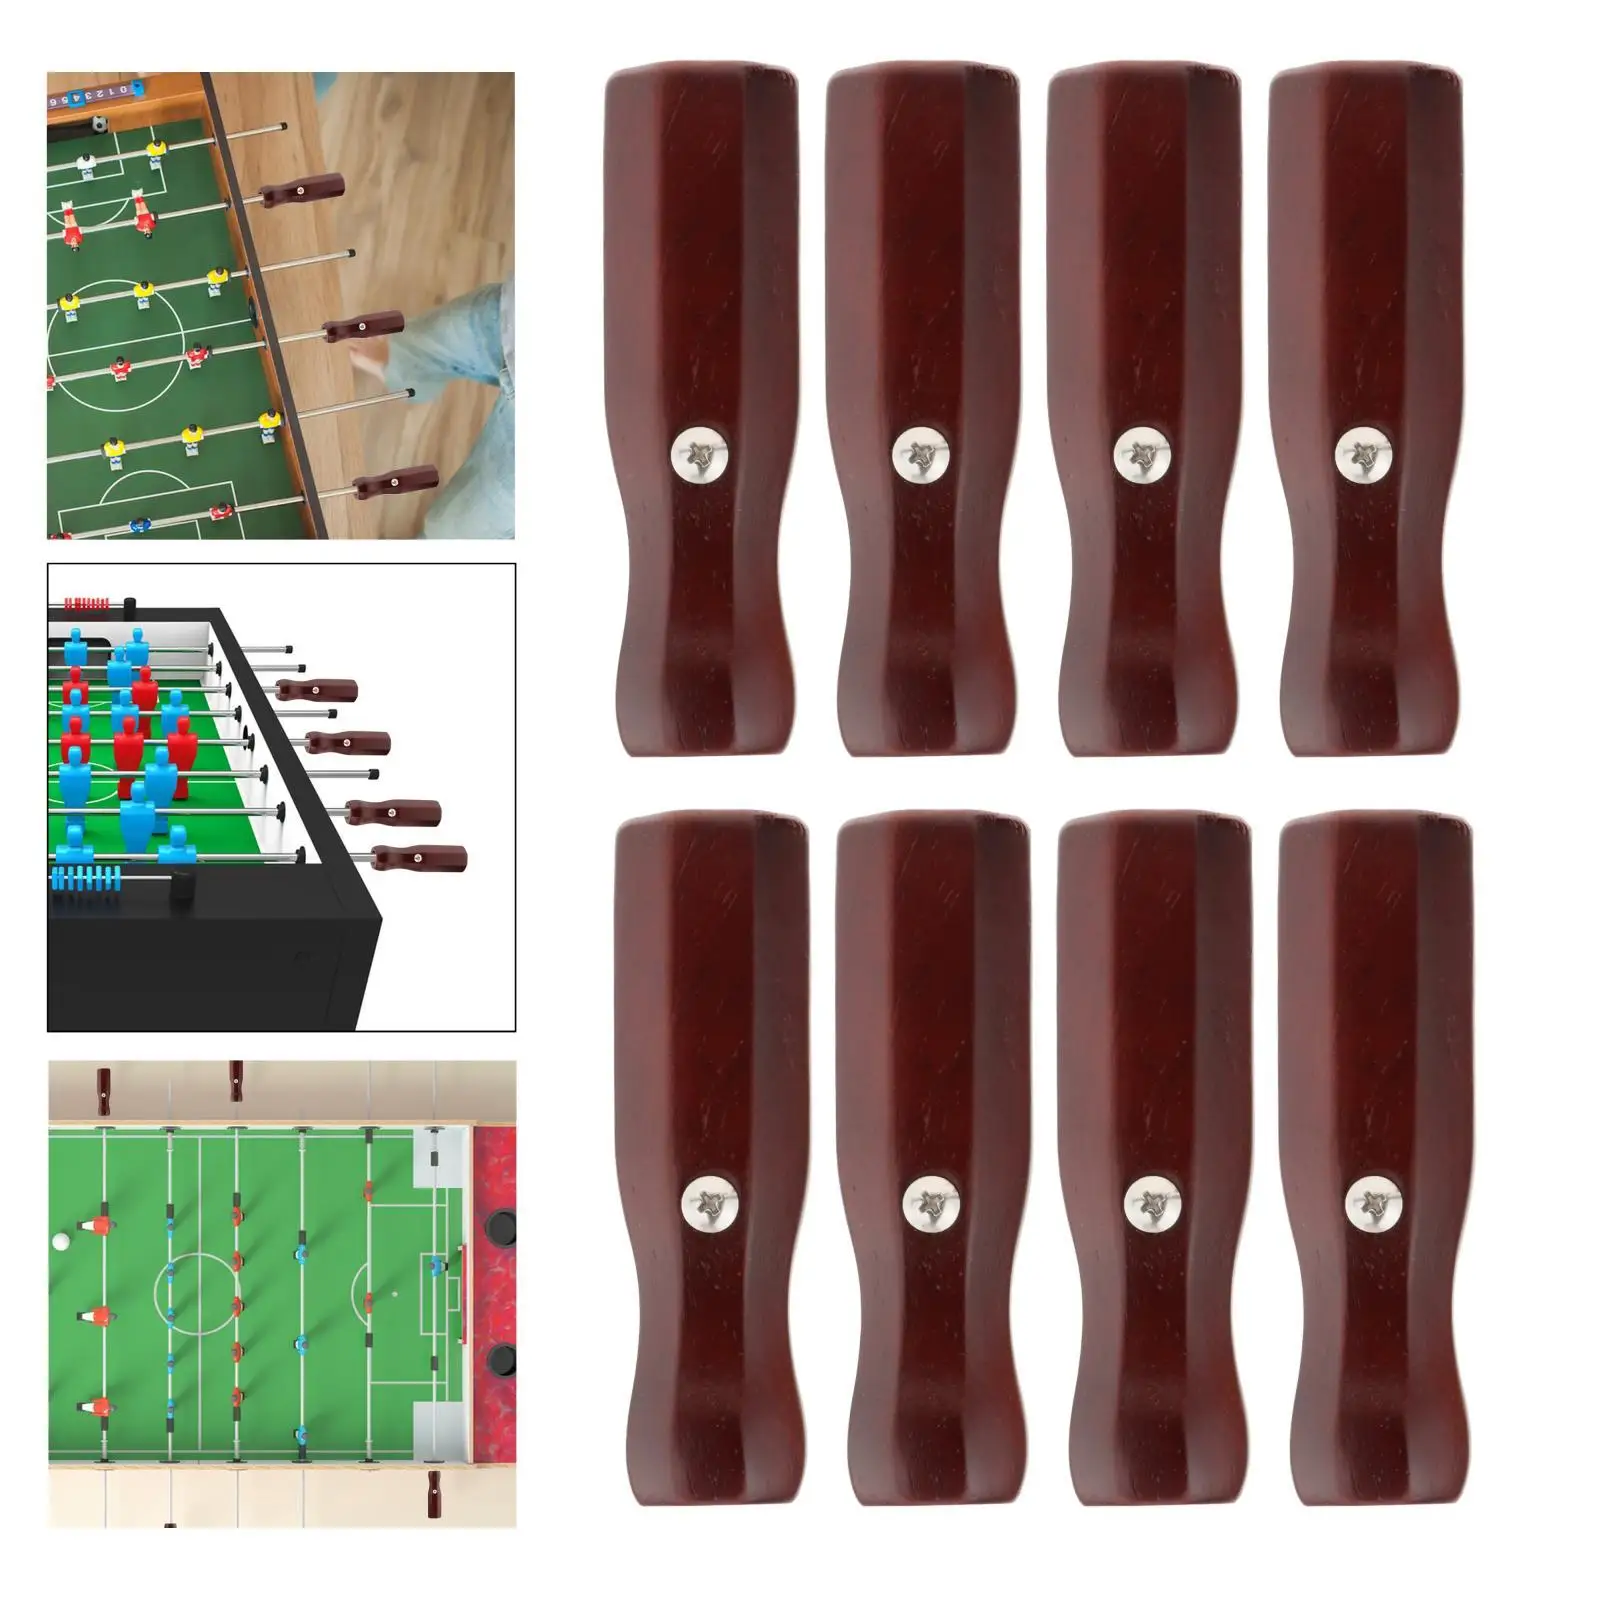 8x Foosball Table Rod End Caps Indoor Game Comfortable Soccer Table Handles